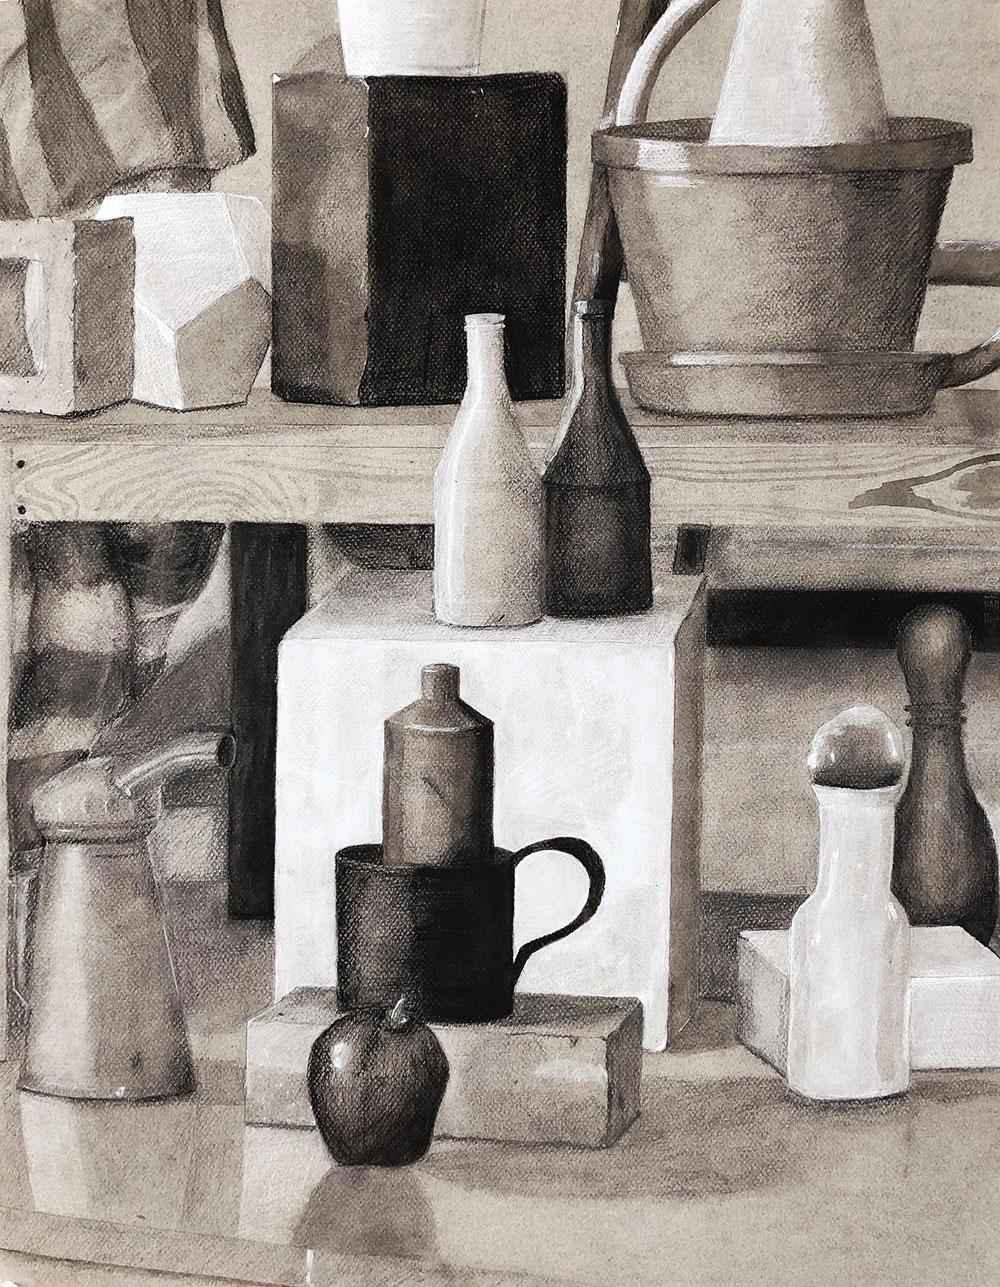 Heightened value drawing of bottles and pots, drawn in white and black charcoal pencils.